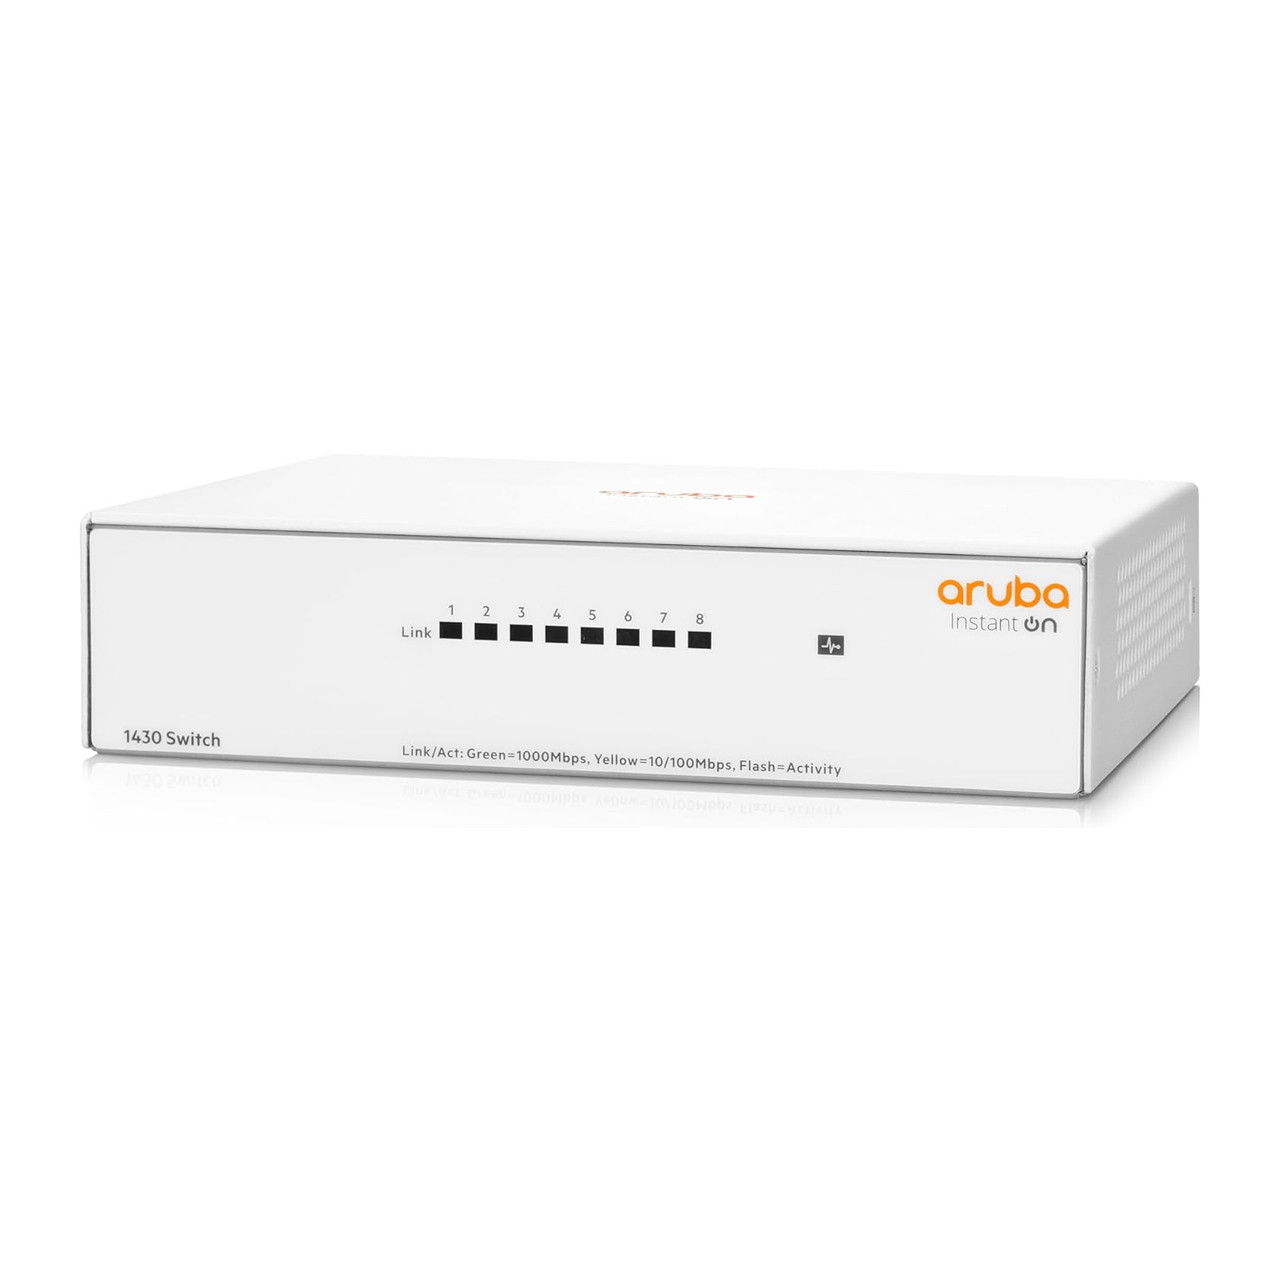 Aruba Instant On 1430 8-Port Gb Unmanaged Layer 2 Ethernet Switch | 8X 1G | Fan-Less | US Cord R8R45A#ABA